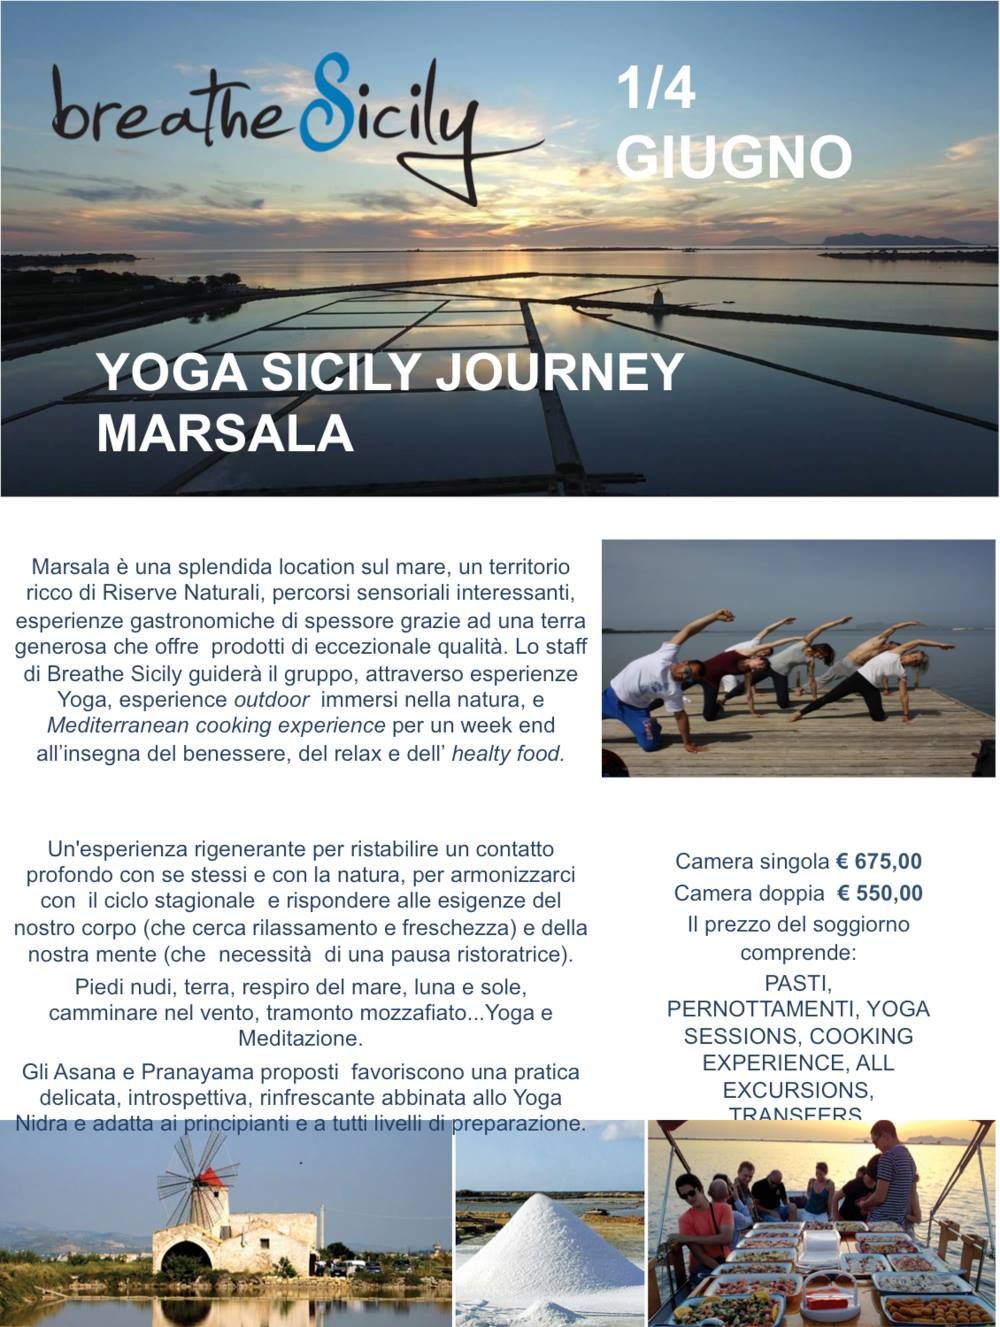 Yoga daily activities and cooking lessons with Breathe Sicily